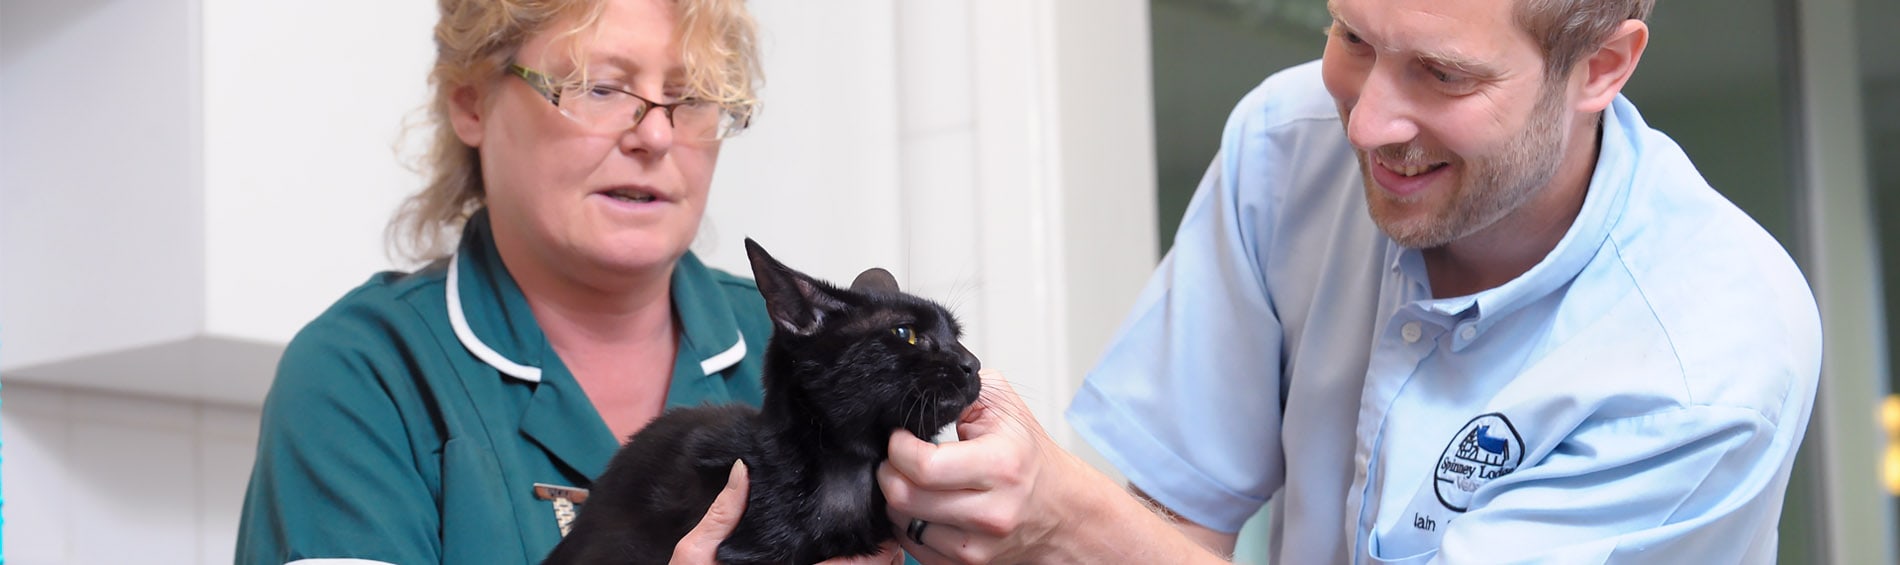 How To Reduce Cat Stress At The Vets